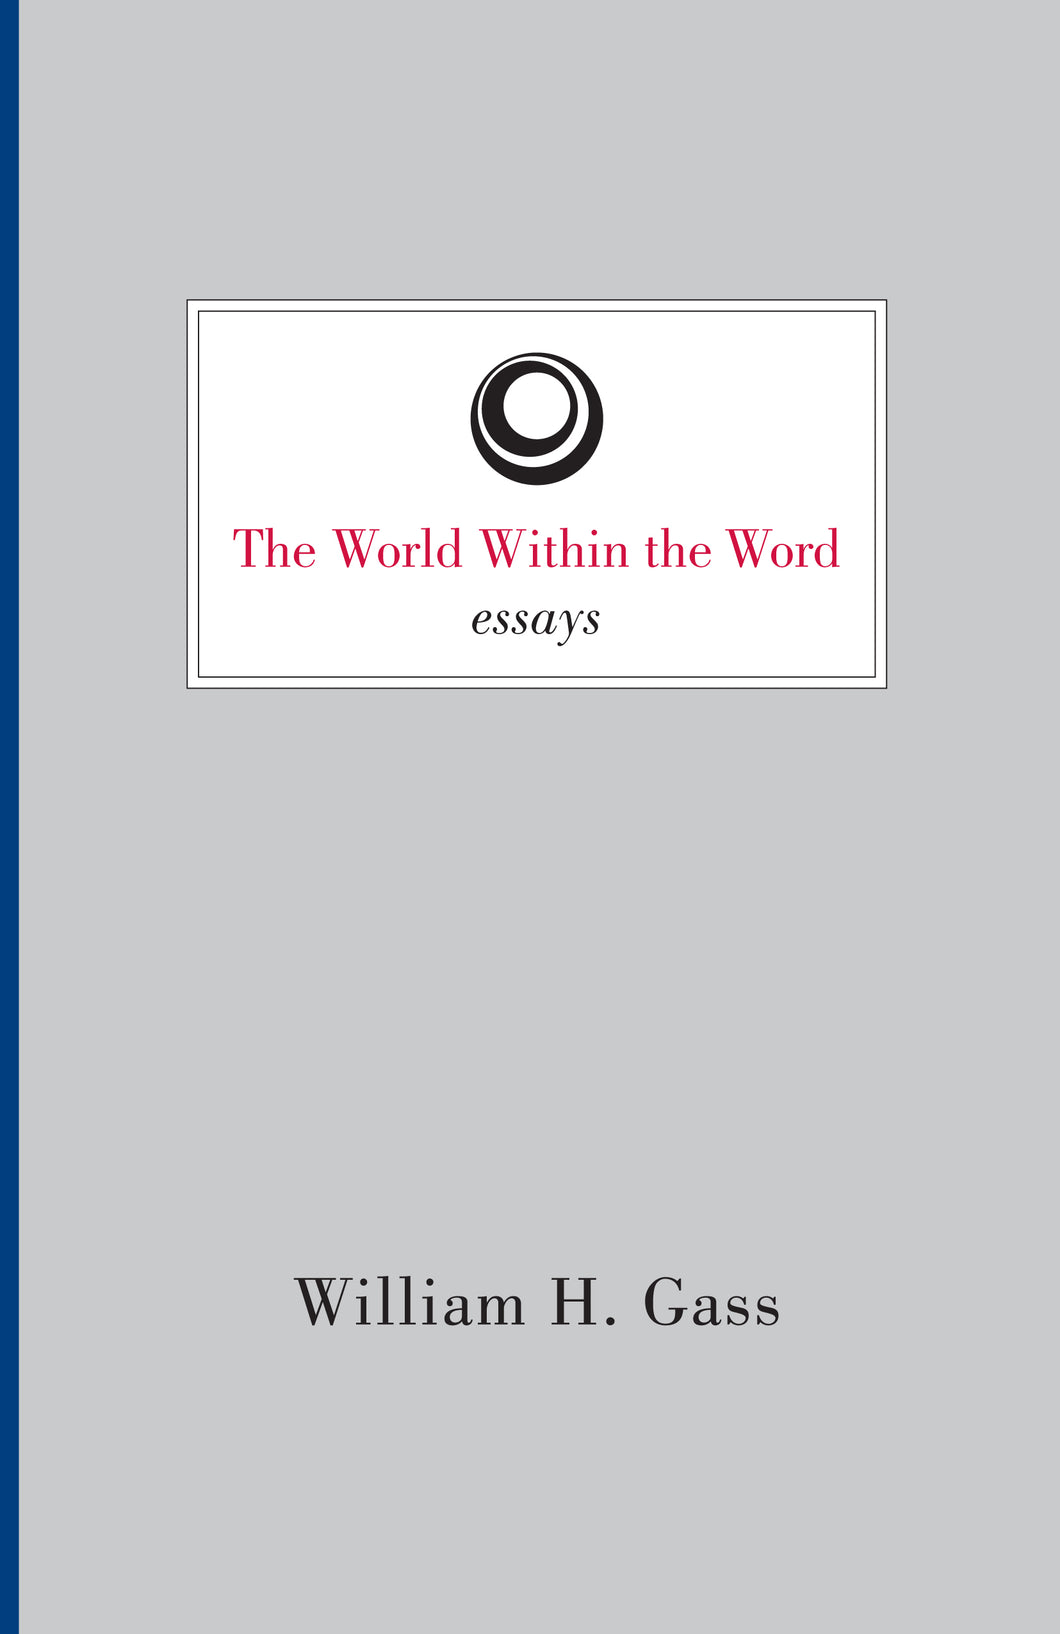 The World Within the Word